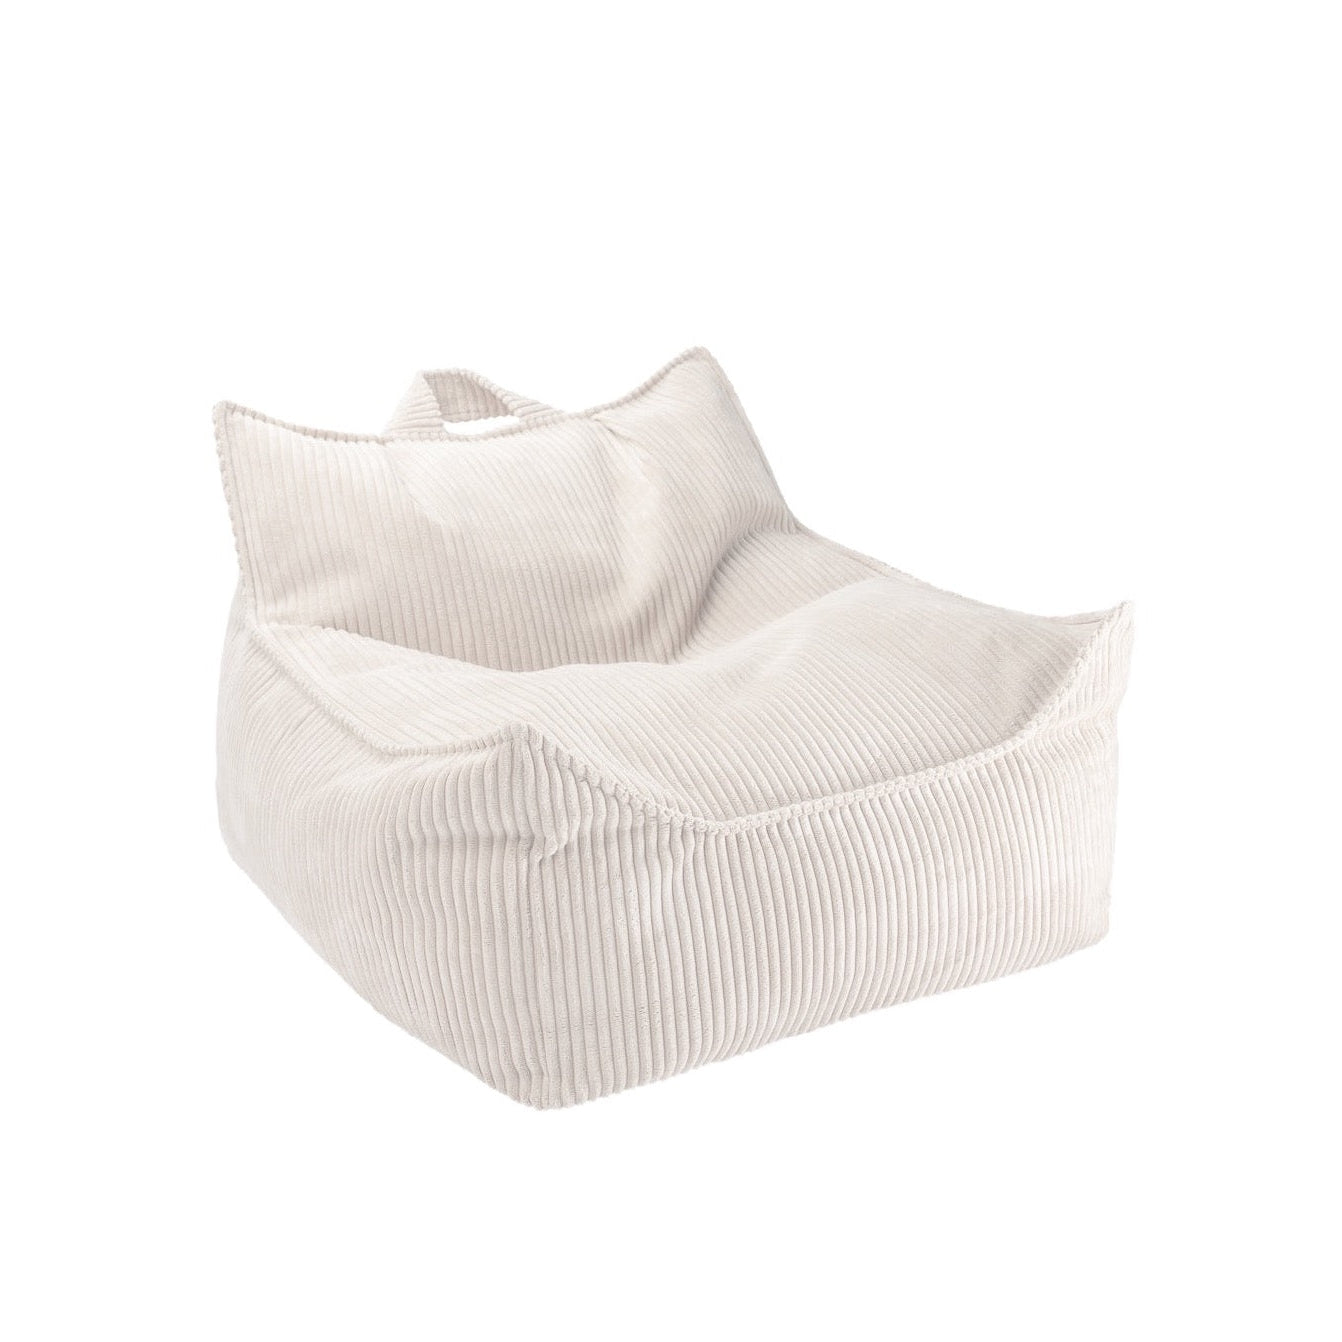 Wigiwama Marshmallow Beanbag Chair at Rugs by Roo